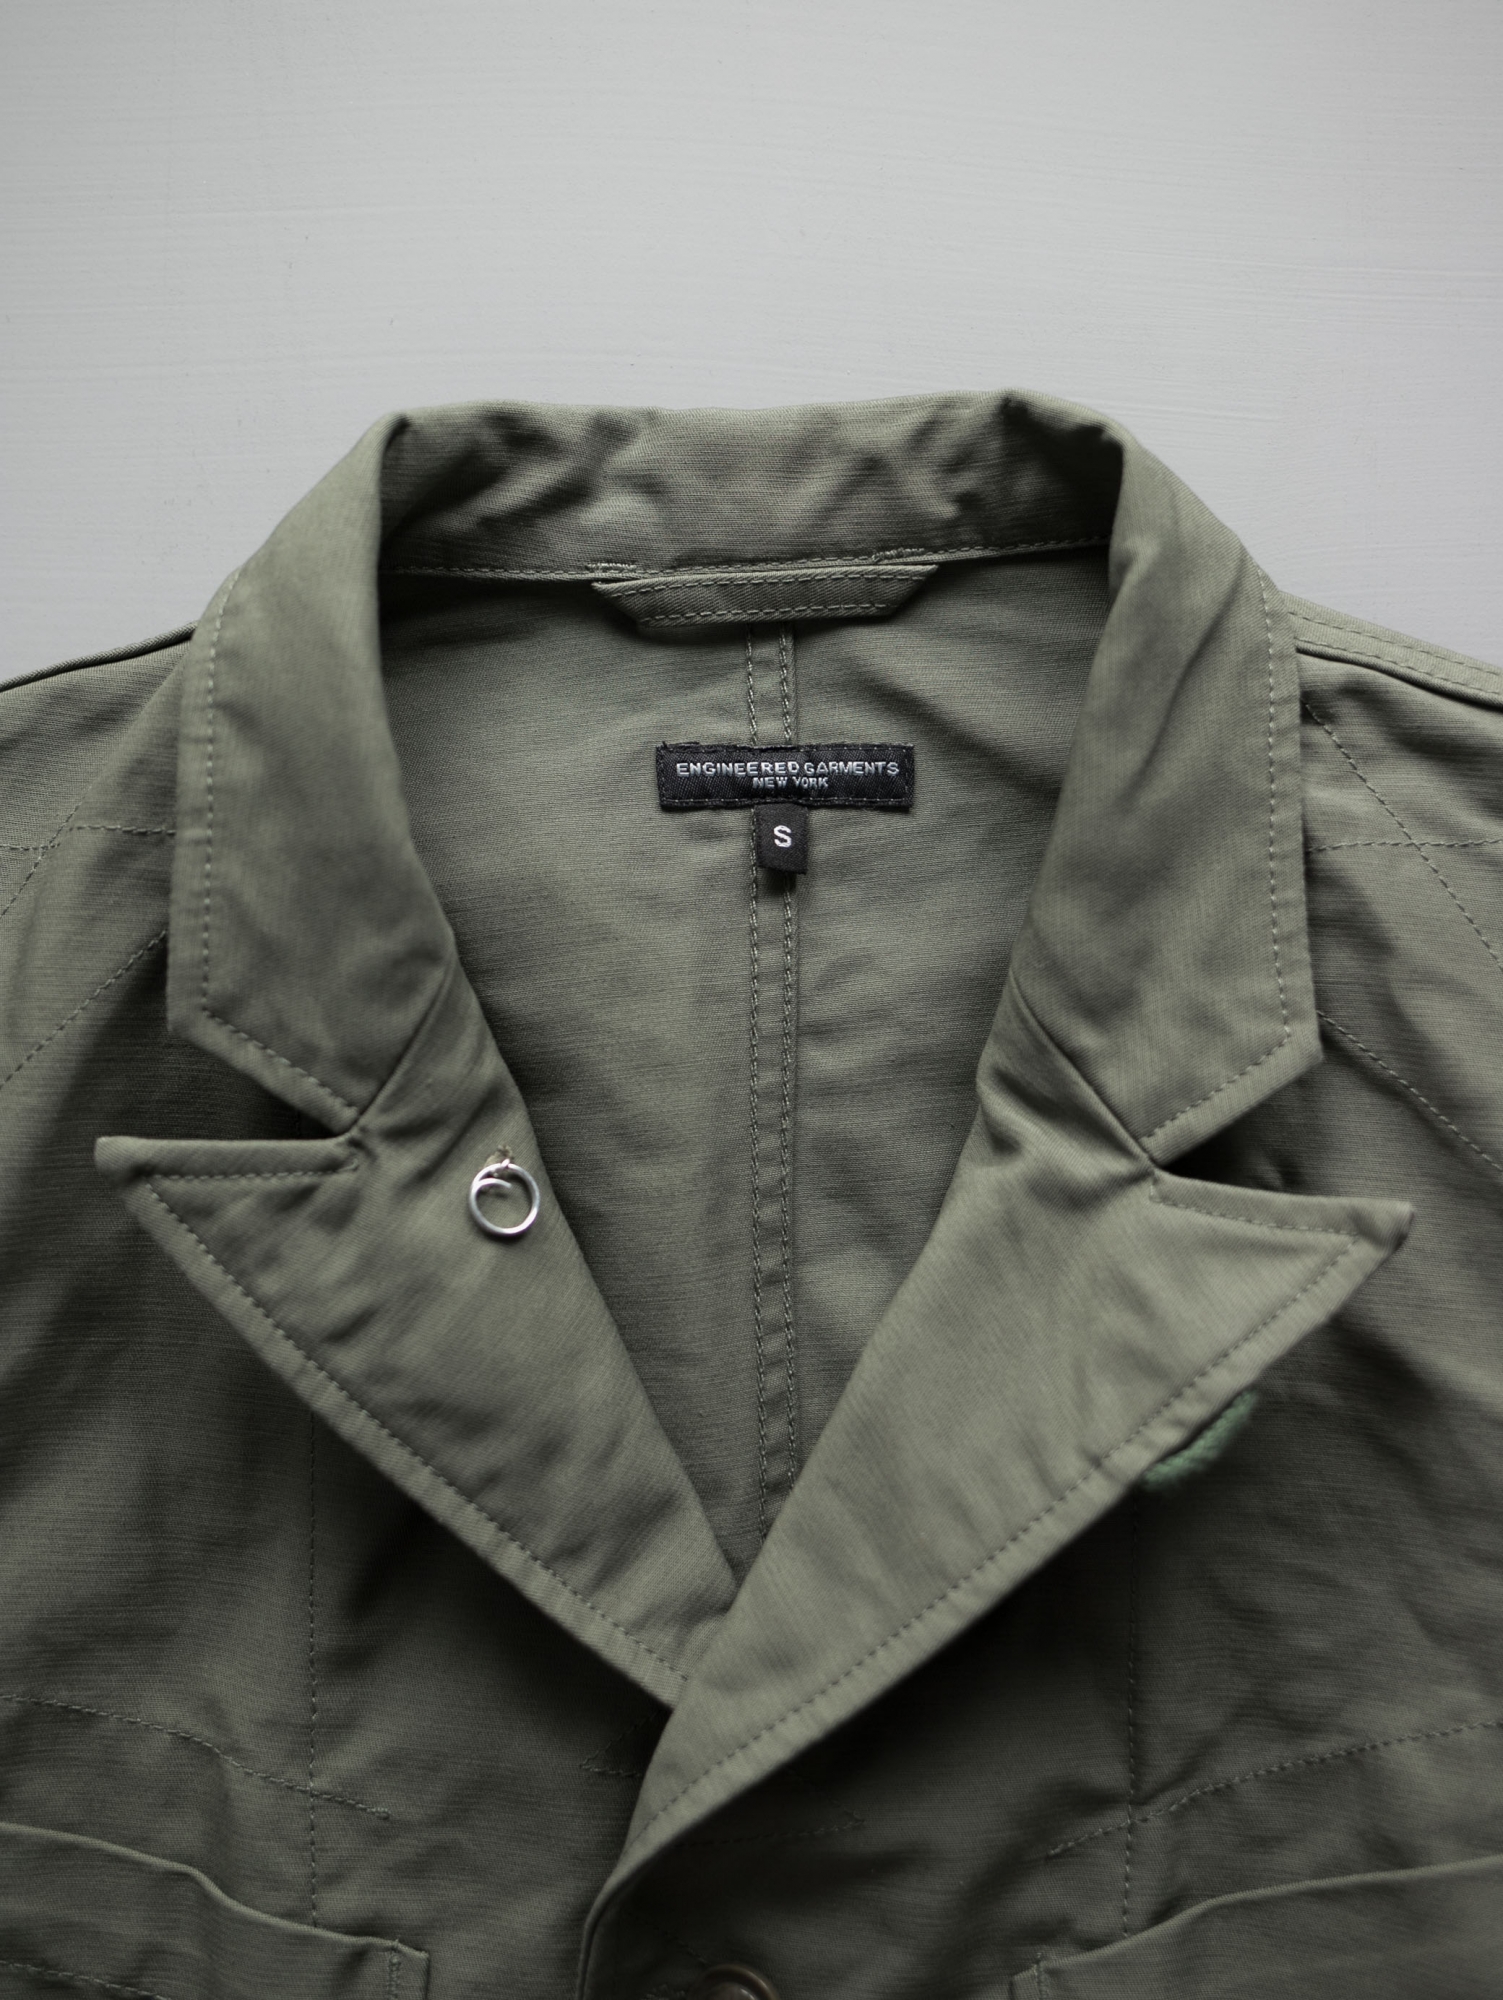 BEDFORD JACKET – COTTON DOUBLE CLOTH Olive | Dresswell online store